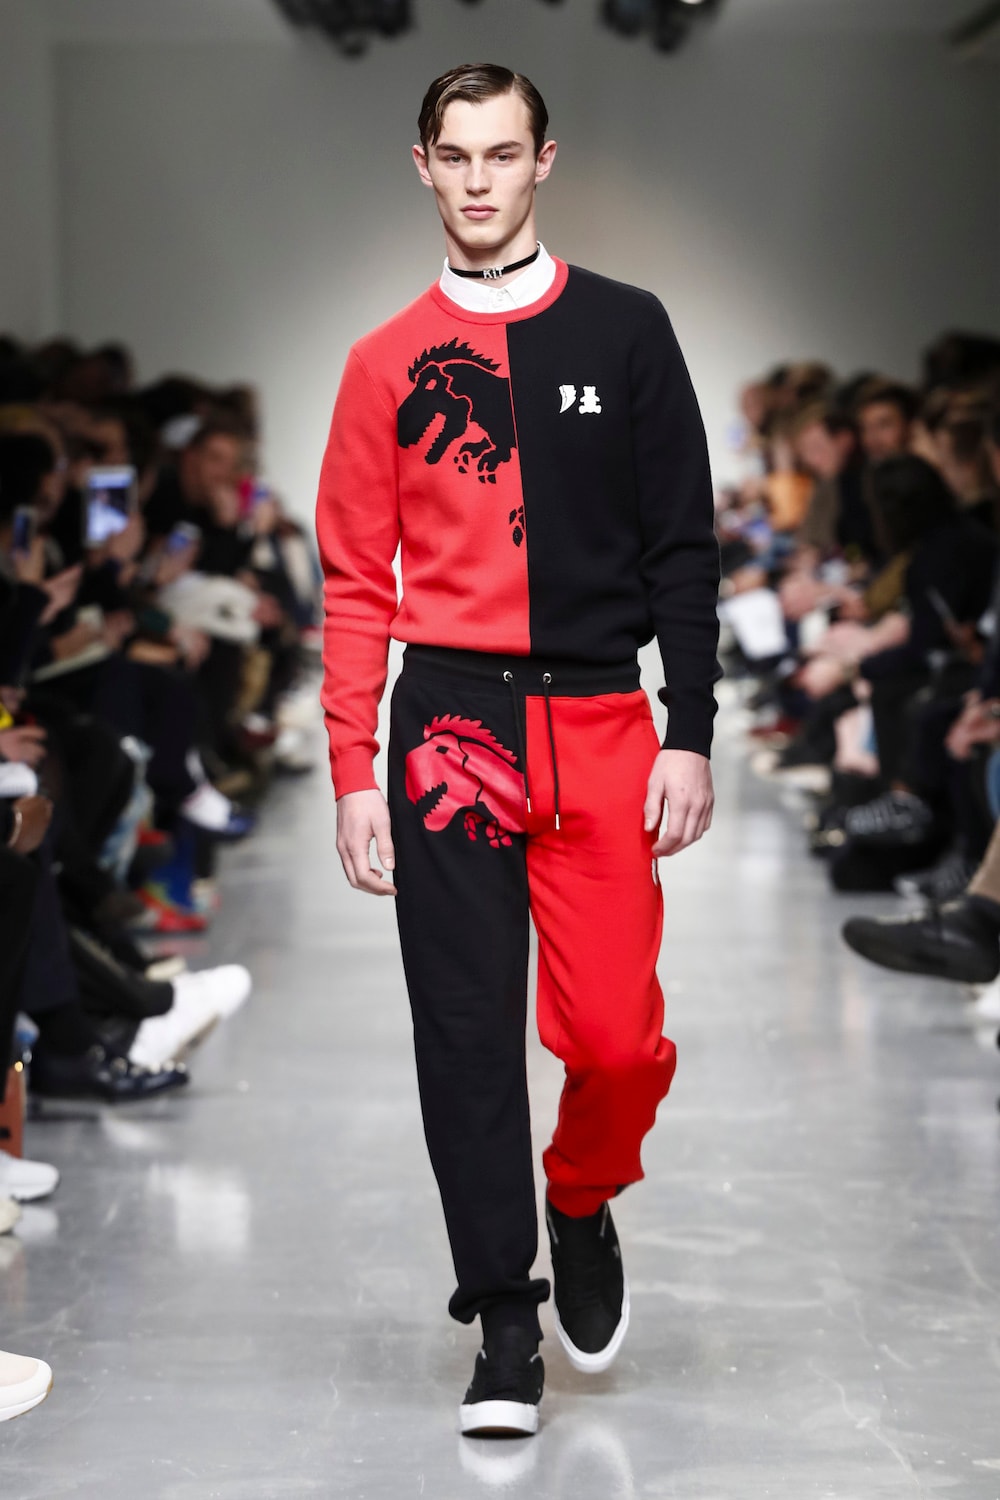 Bobby Abley Mighty Morphin Power Rangers